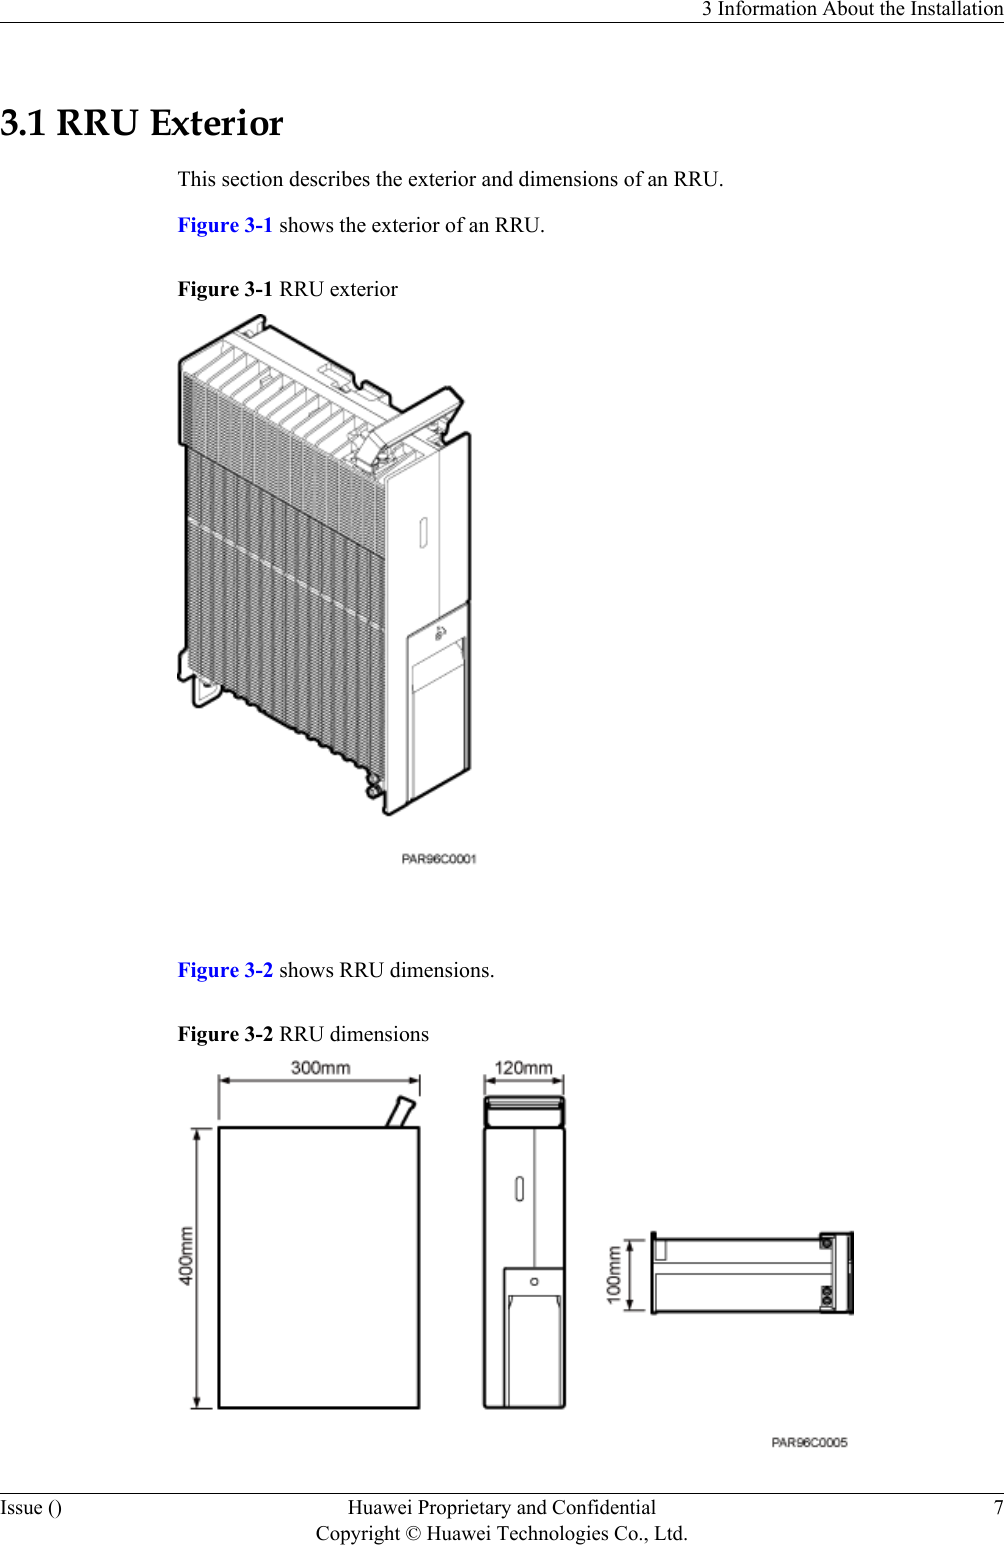 3.1 RRU ExteriorThis section describes the exterior and dimensions of an RRU.Figure 3-1 shows the exterior of an RRU.Figure 3-1 RRU exterior Figure 3-2 shows RRU dimensions.Figure 3-2 RRU dimensions3 Information About the InstallationIssue () Huawei Proprietary and ConfidentialCopyright © Huawei Technologies Co., Ltd.7